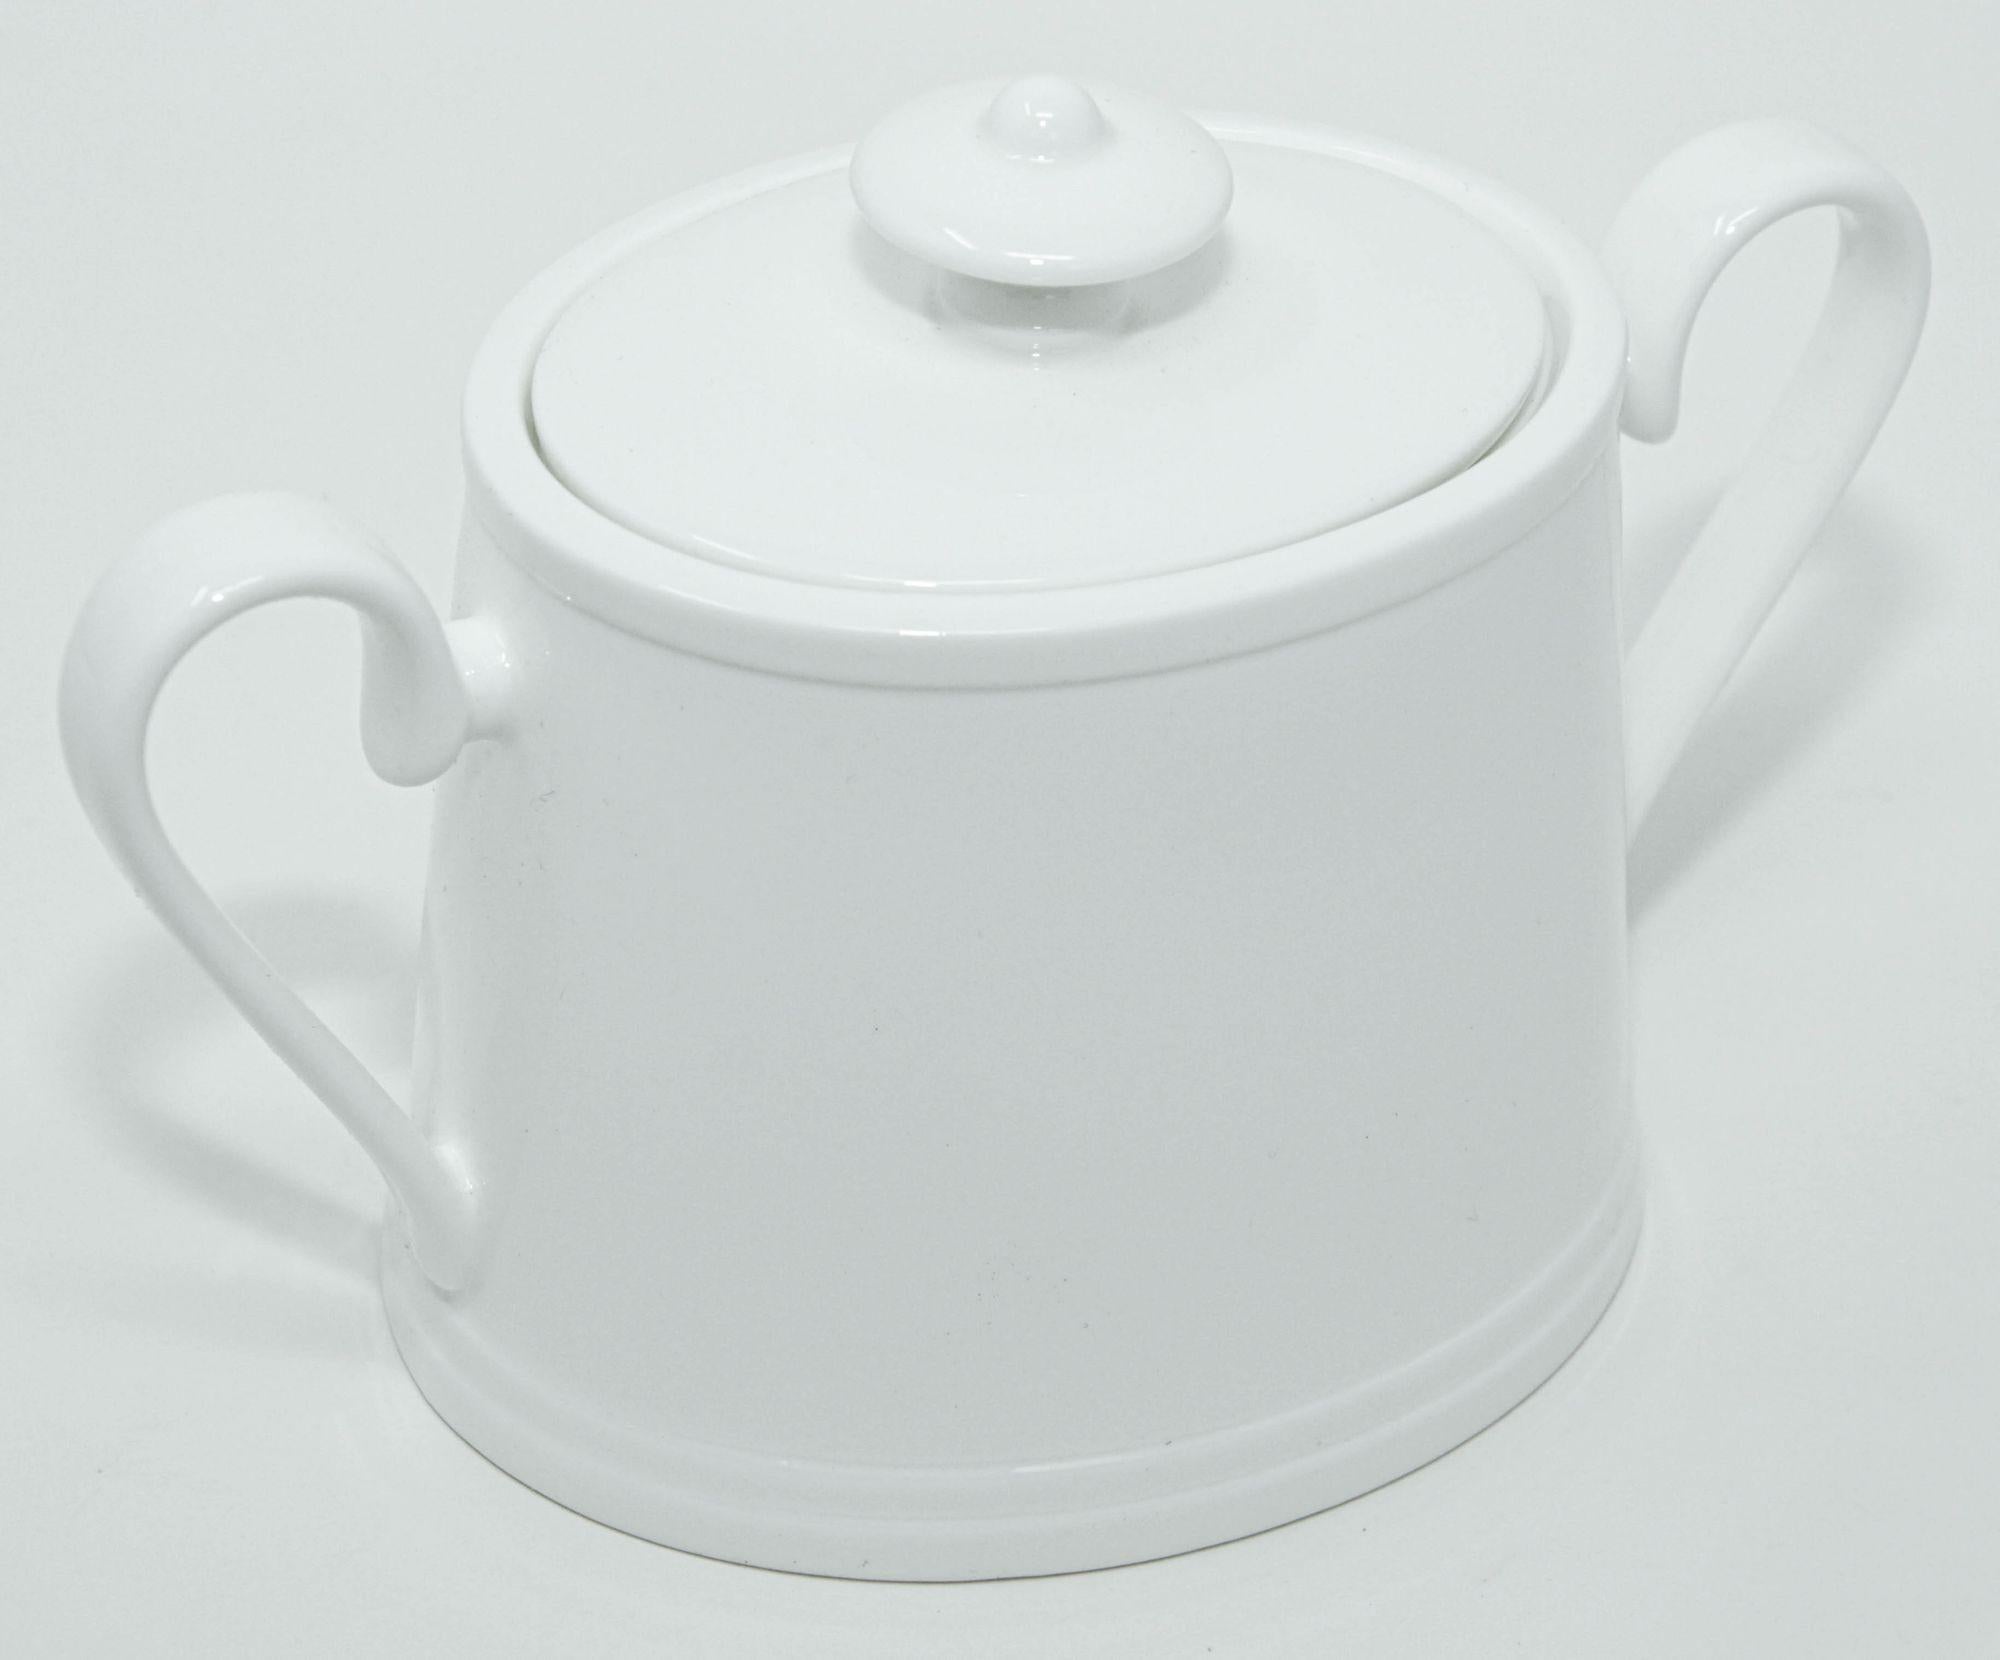 20th Century Villeroy & Boch Stella Hotel white Bone China Sugar Bowl with Cover For Sale